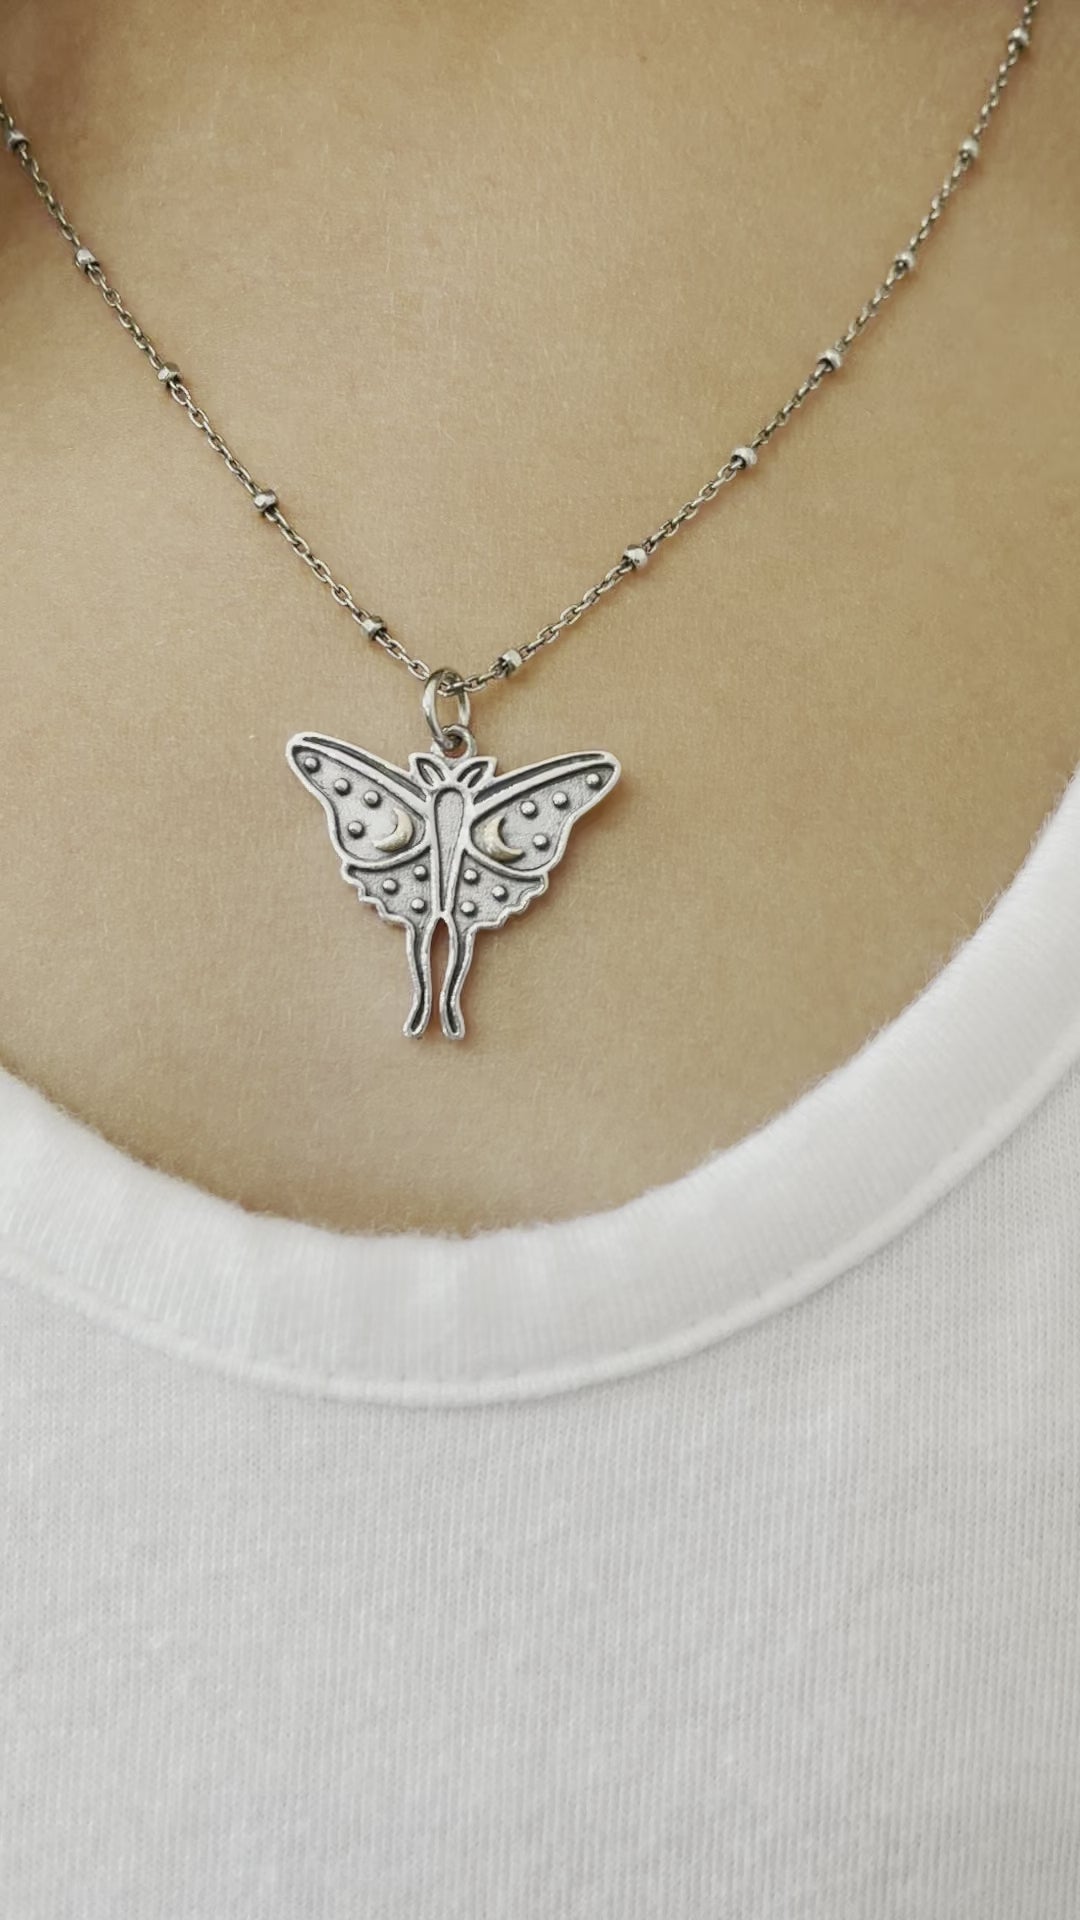 Lunar Moth Necklace | Antique Silver Chain Pendant | Light Years Jewelry